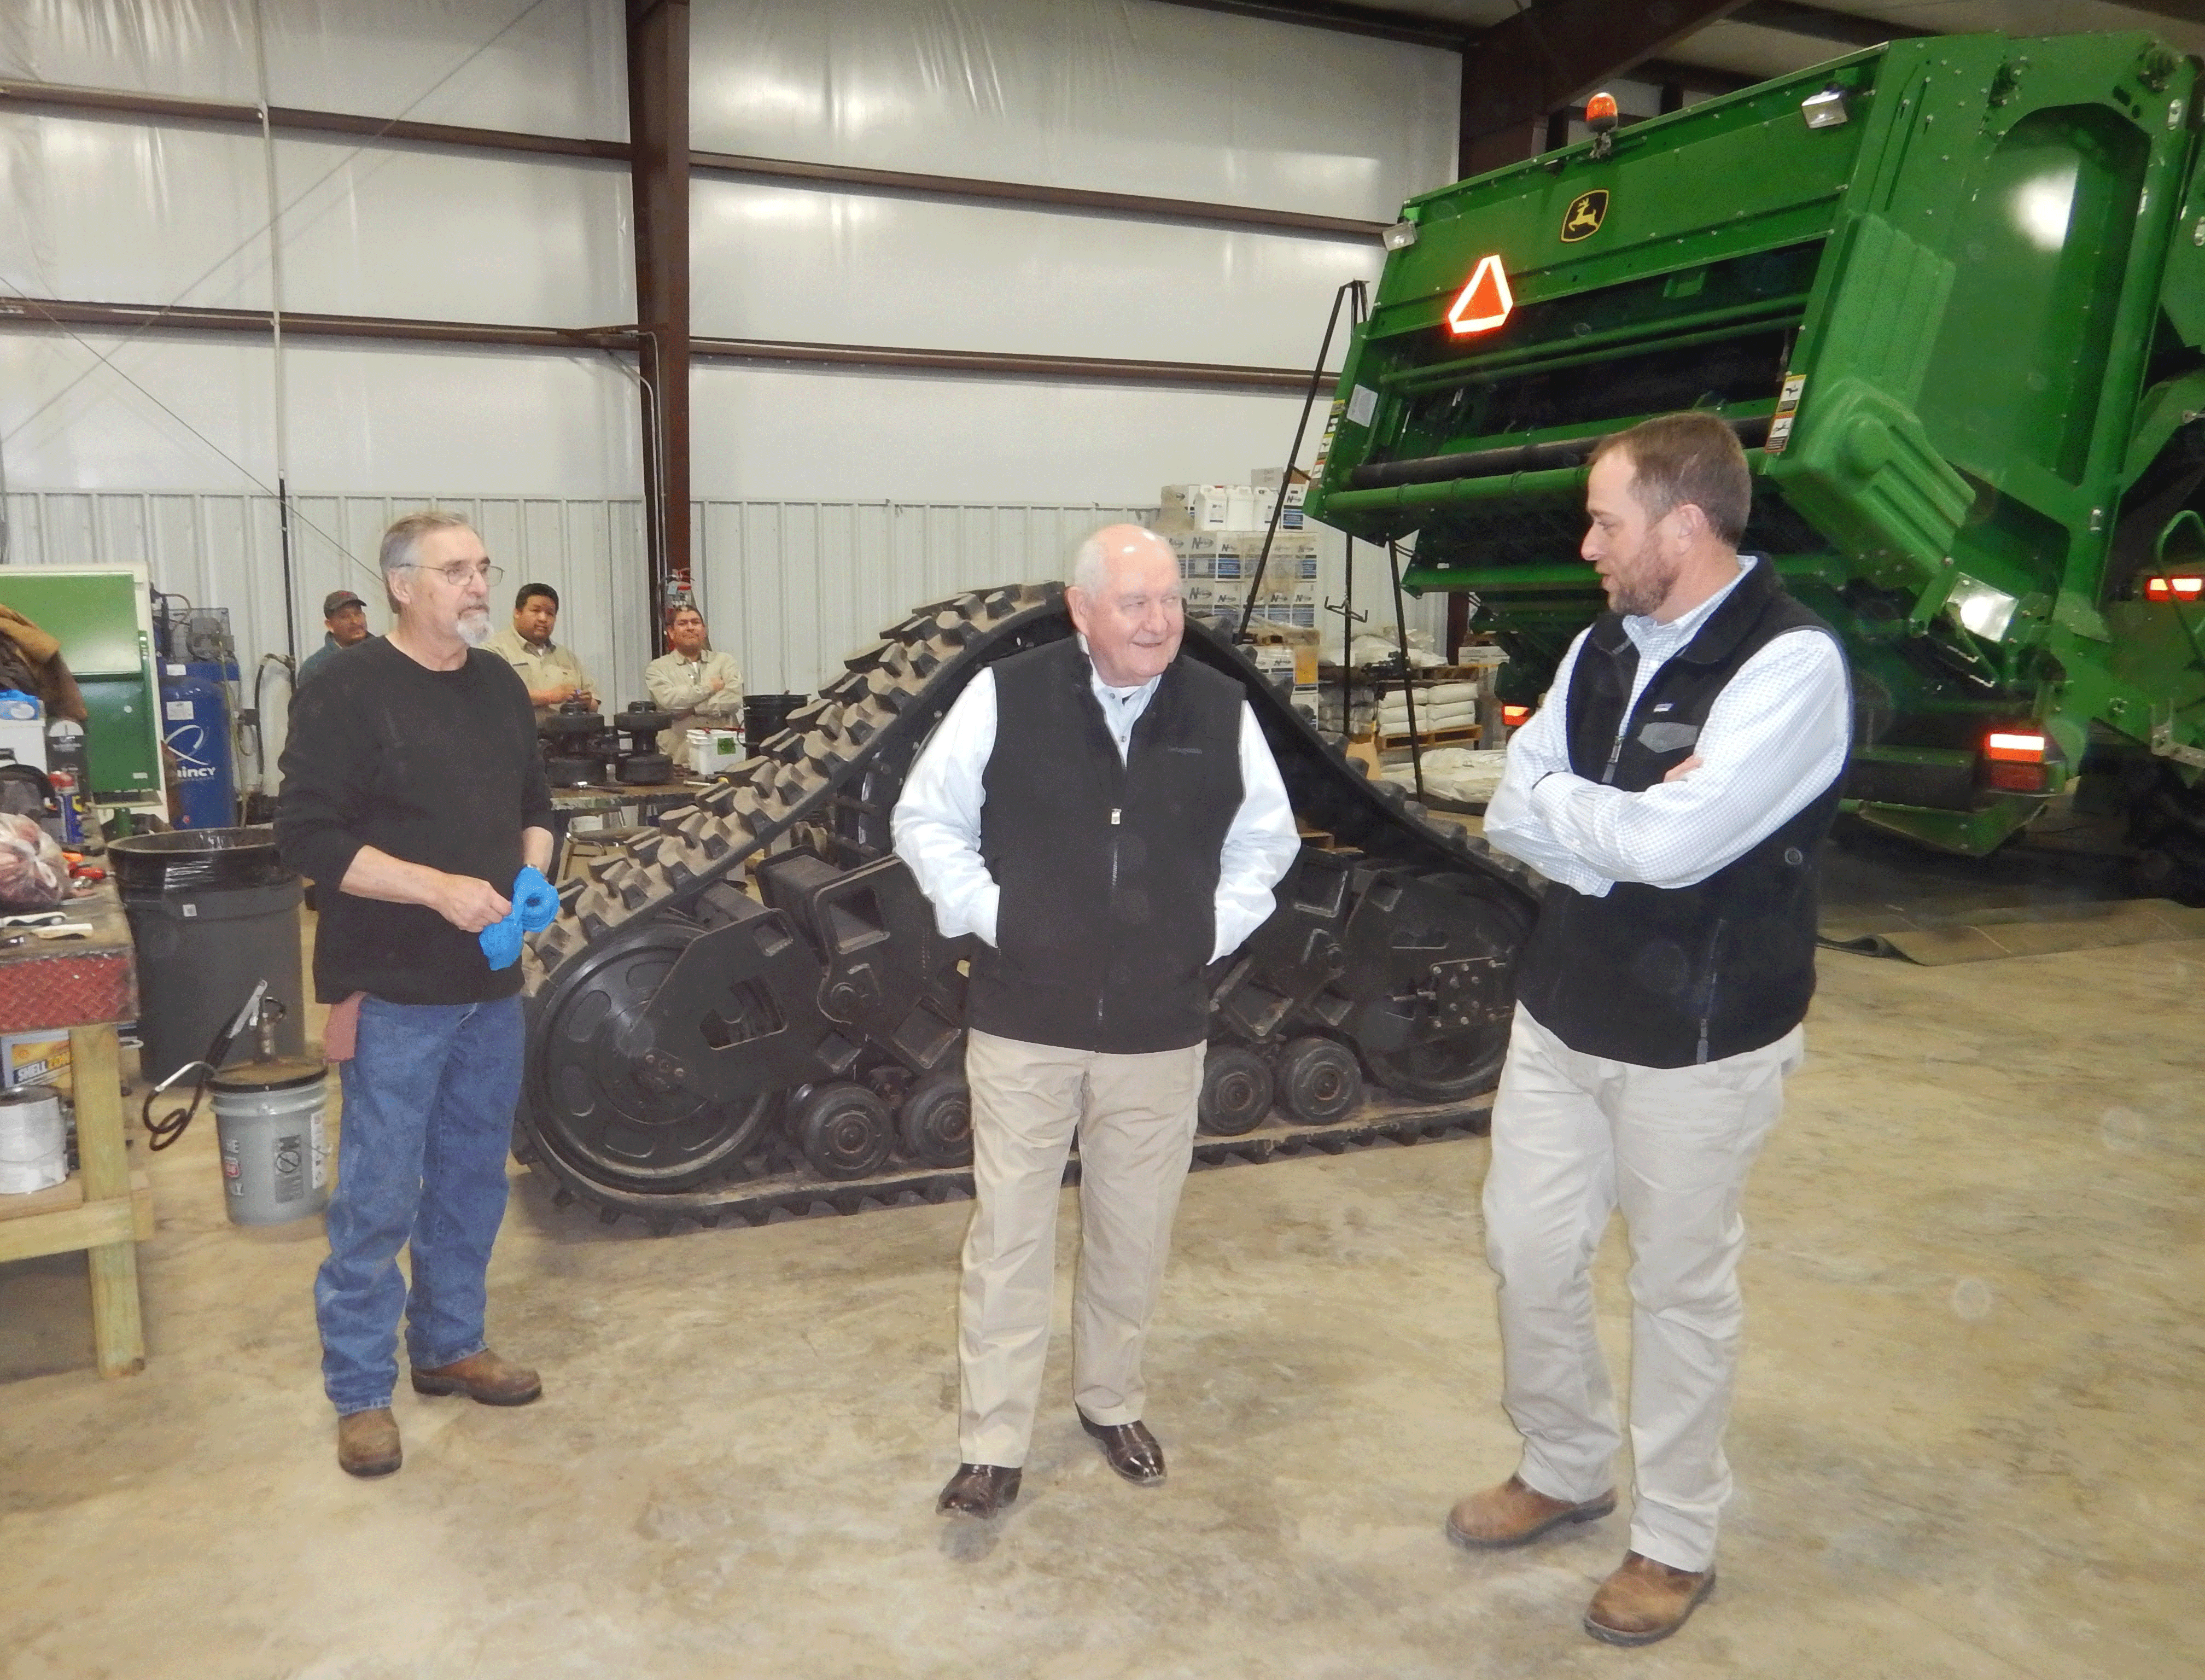 Ag Secy-Perdue visits Dow-Brantley operation, surrounded by workmen repairing farm equipment